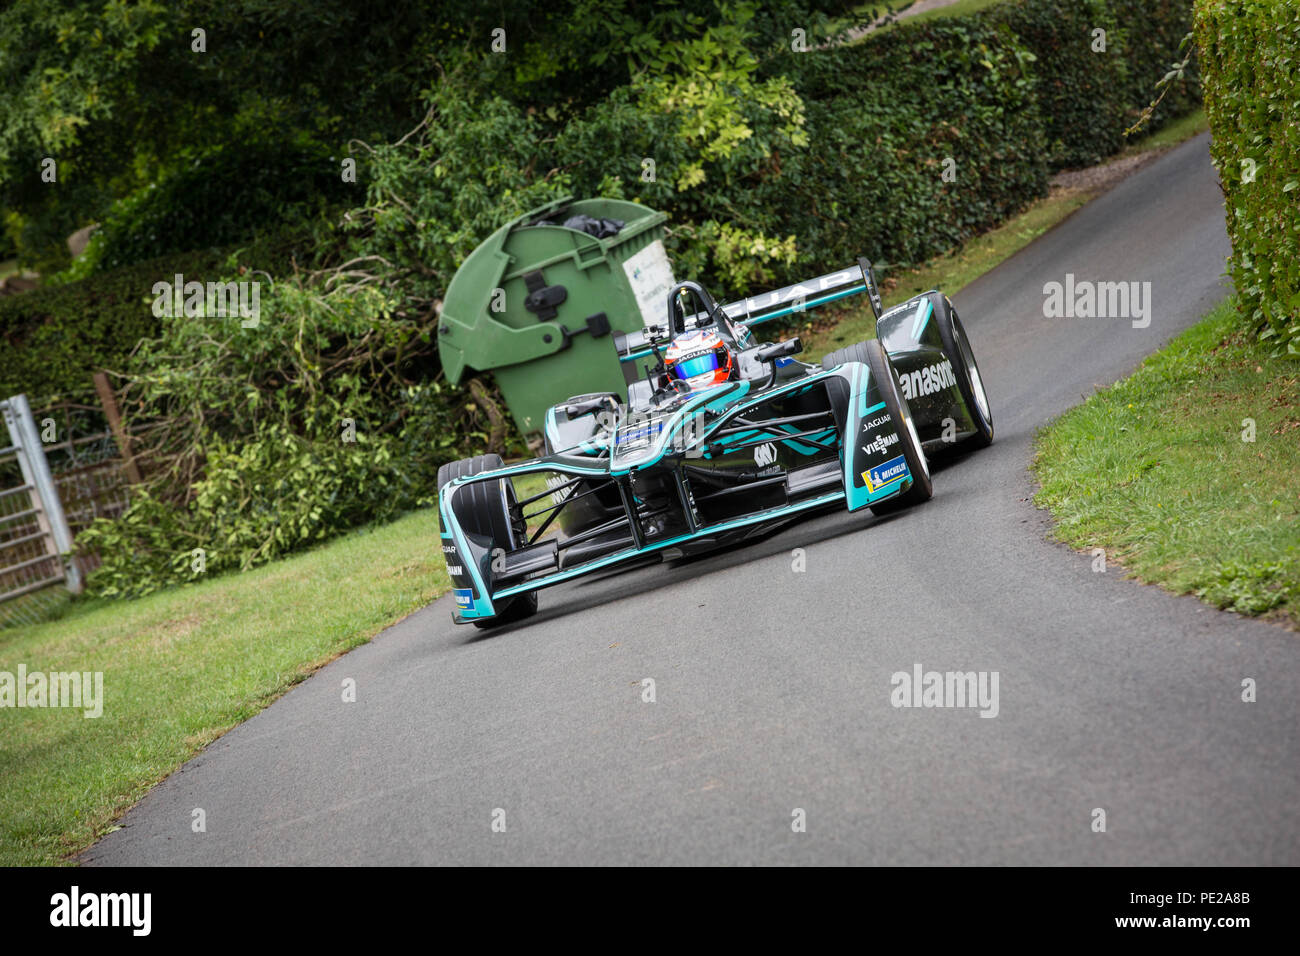 Worcestershire, UK. 12th August 2018. UK debut of Jaguar Racings new Formula E race car the I-TYPE 2 at Shelsley Walsh with their racing driver Mitch Evans 12 August 2018 Credit: steven roe/Alamy Live News Stock Photo